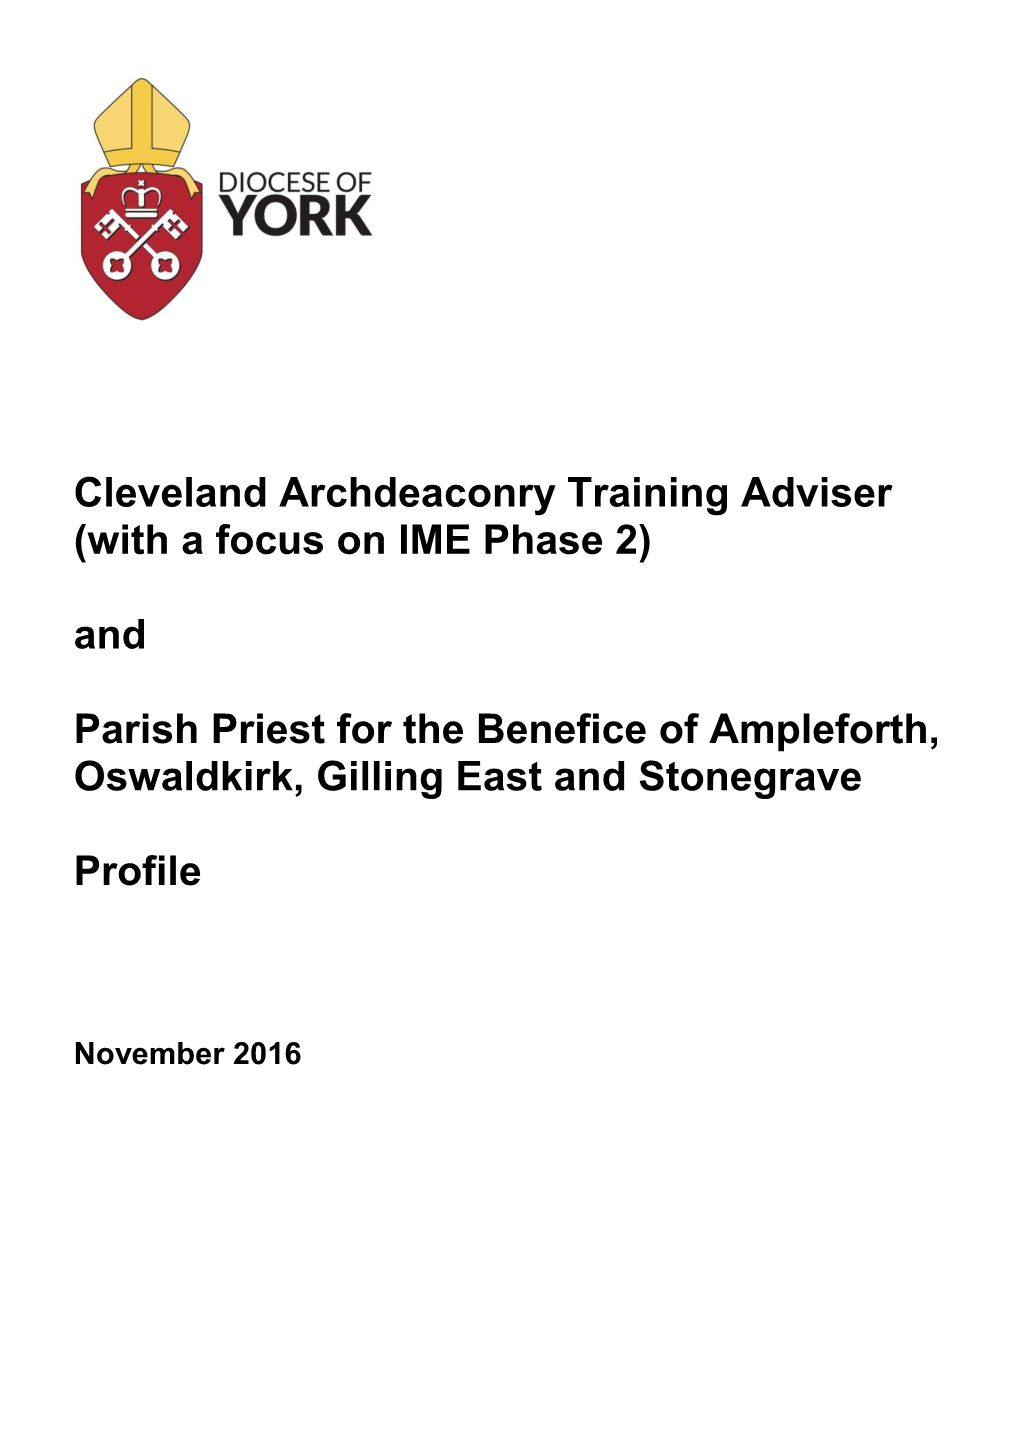 And Parish Priest for the Benefice of Ampleforth, Oswaldki